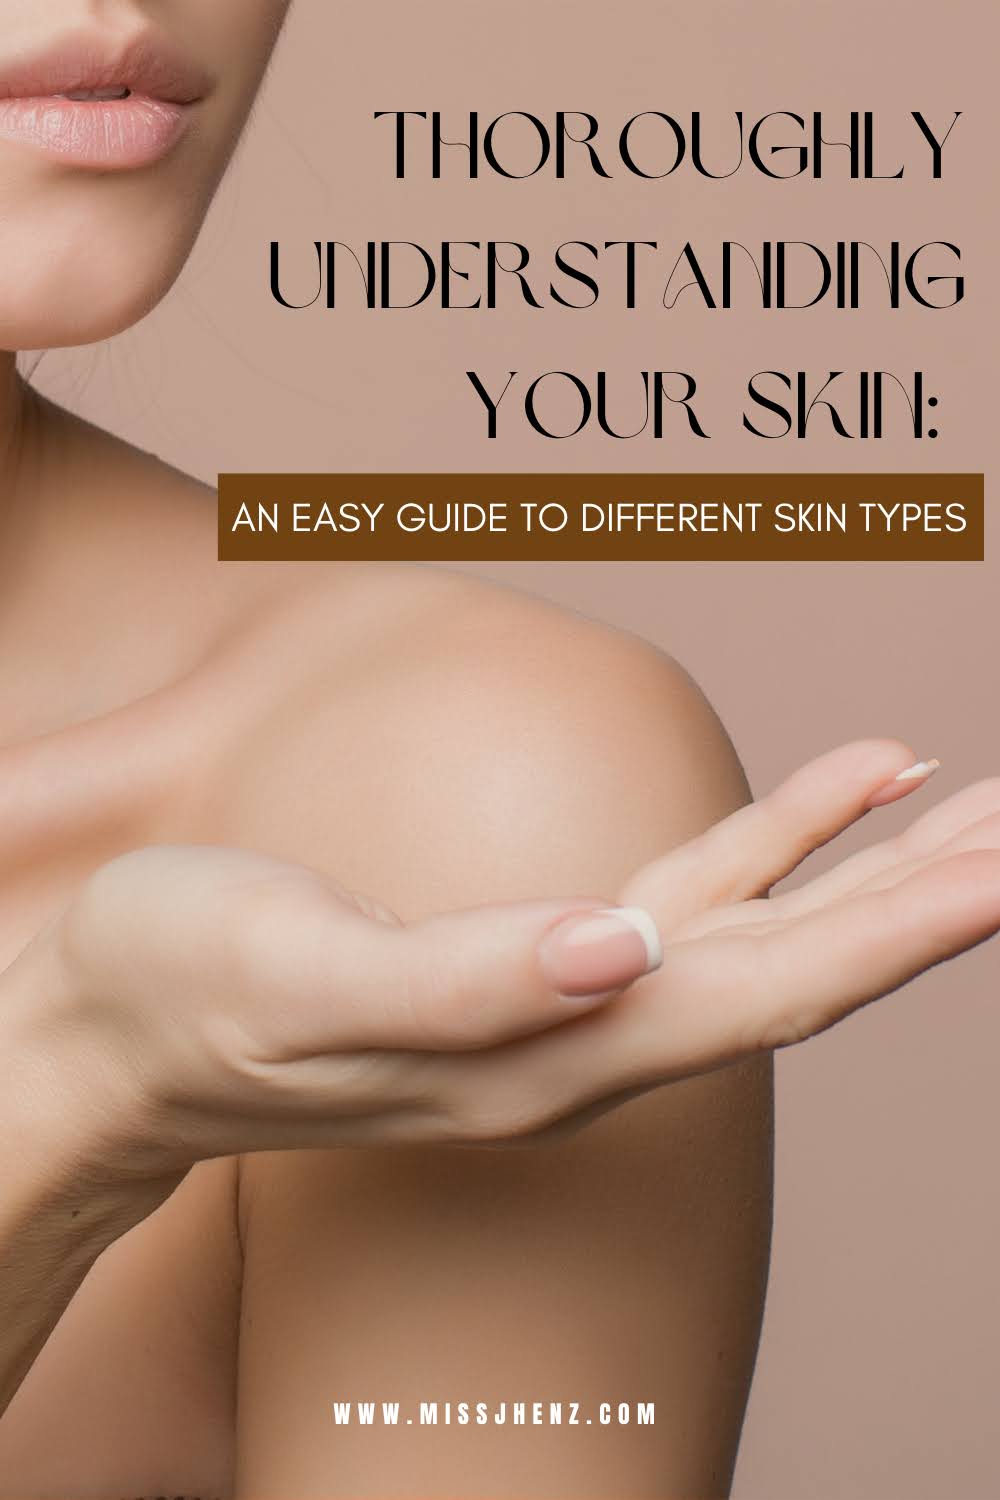 Thoroughly Understanding Your Skin: An Easy Guide to Different Skin Types